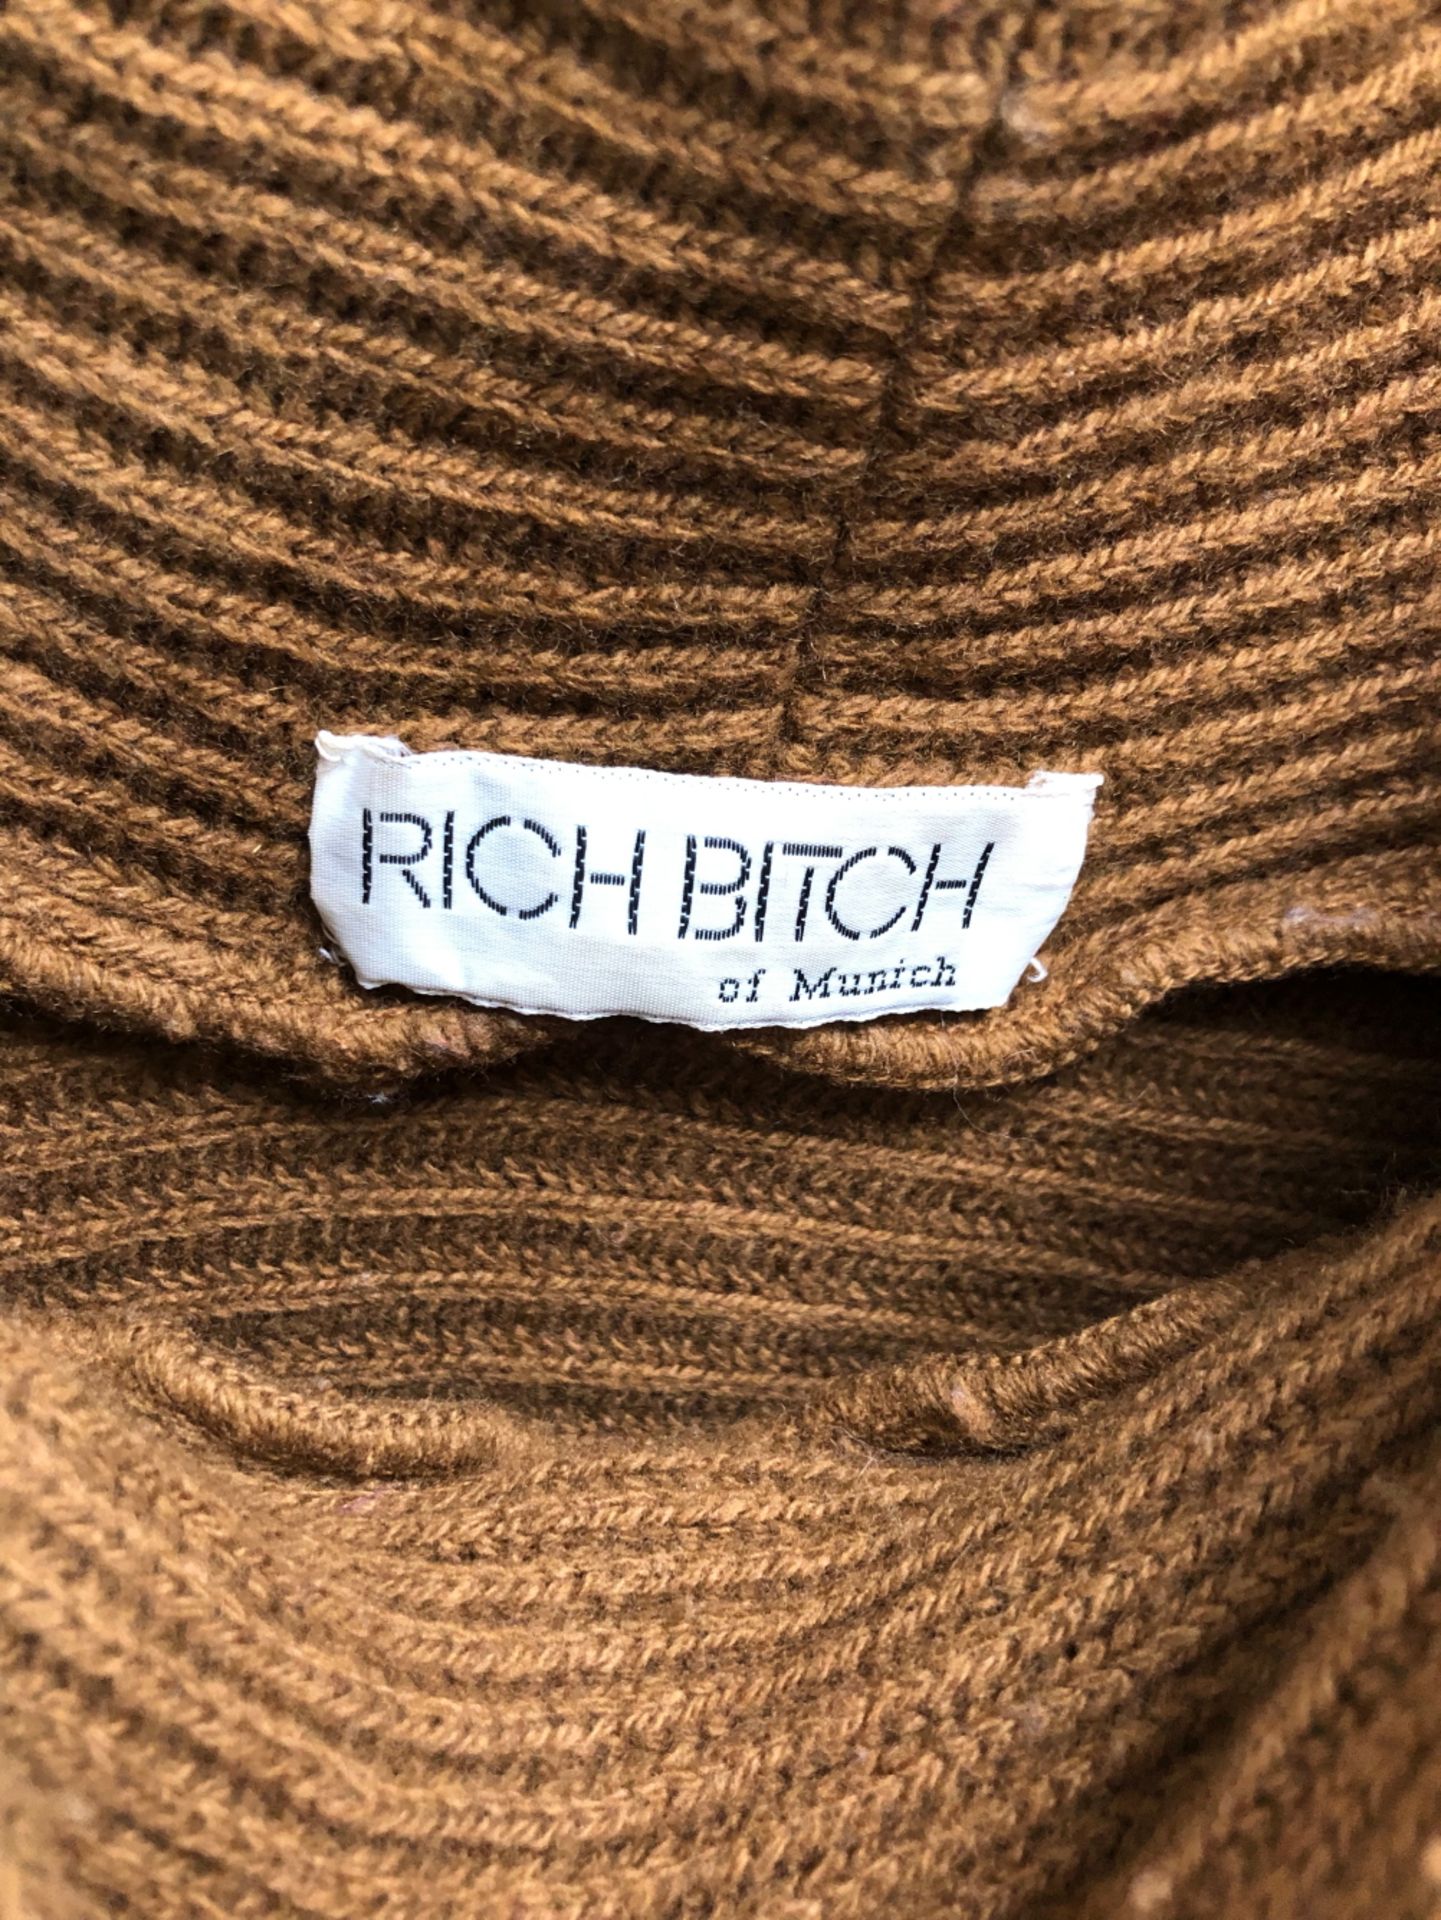 A BROWN RALPH LAUREN CASHMERE CARDIGAN WITH LEATHER ELBOW PADS, TOGETHER WITH BROWN RICH BITCH OF - Image 21 of 21